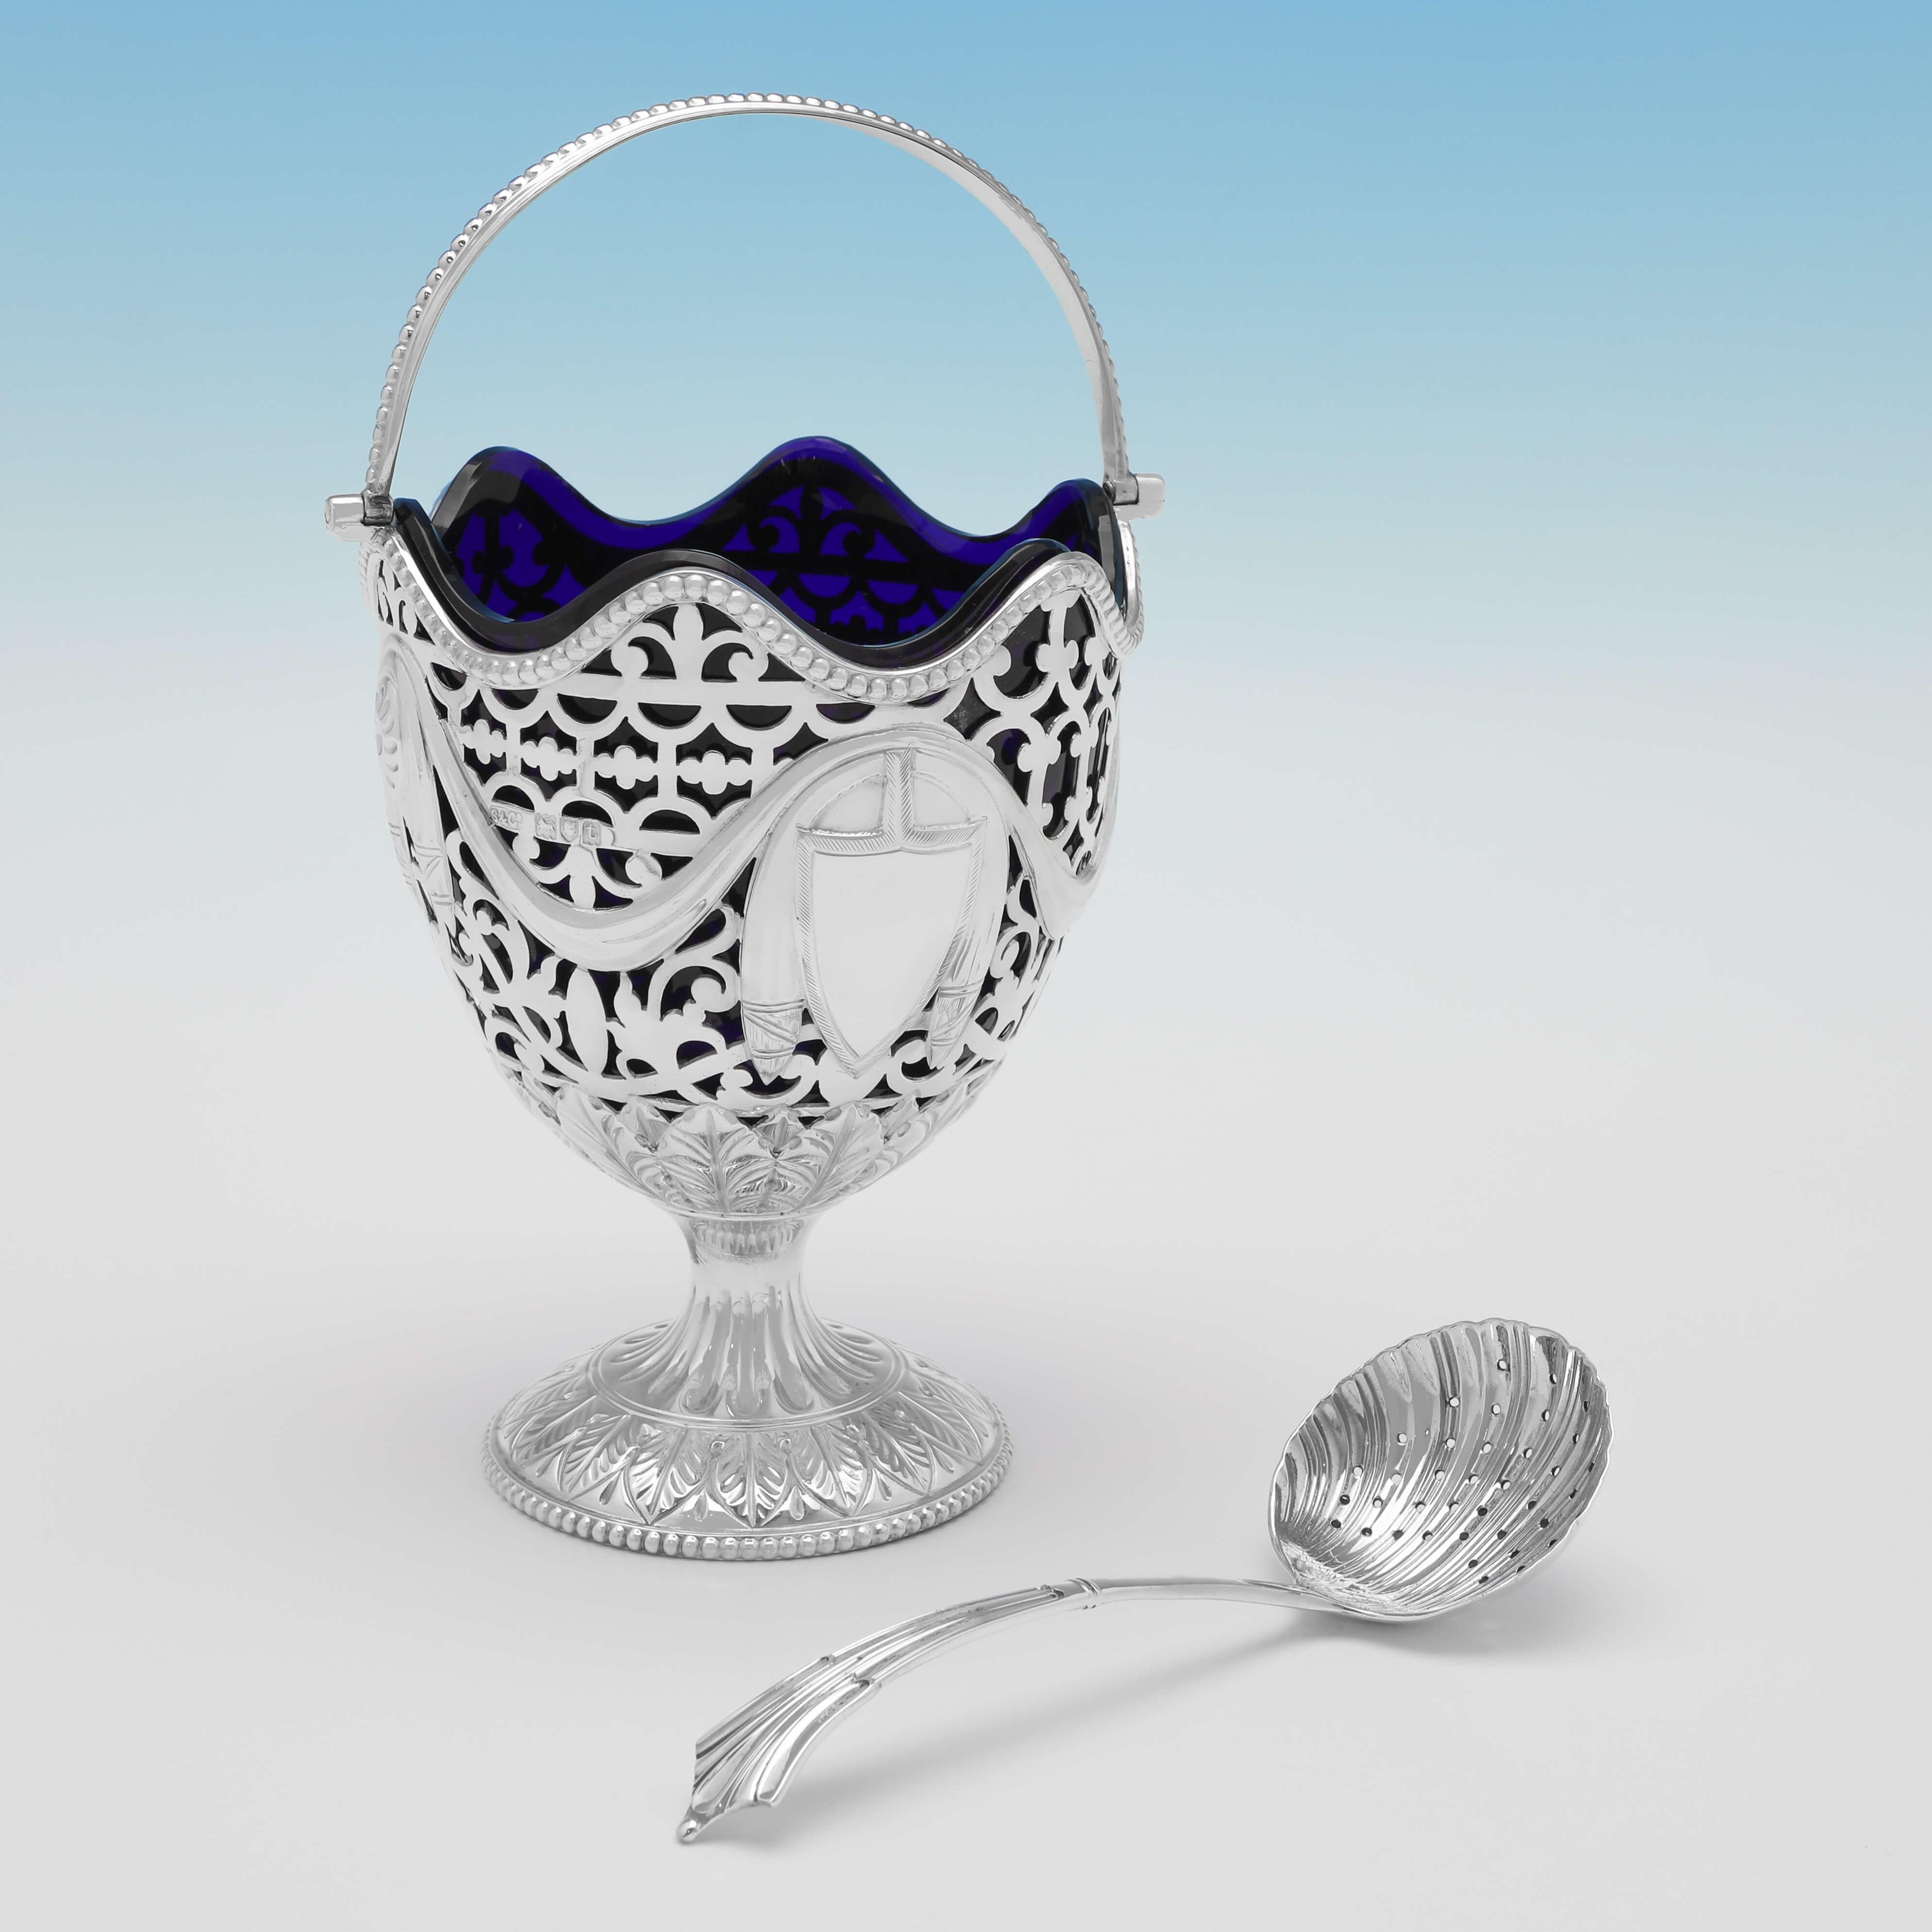 Hallmarked in London in 1914 by skinner & co. (the spoon by George Guirren Rhoden, sheffield 1910), this charming, antique sterling silver sugar basket & spoon, is presented in a box, and has the original blue glass liner. The sugar basket measures